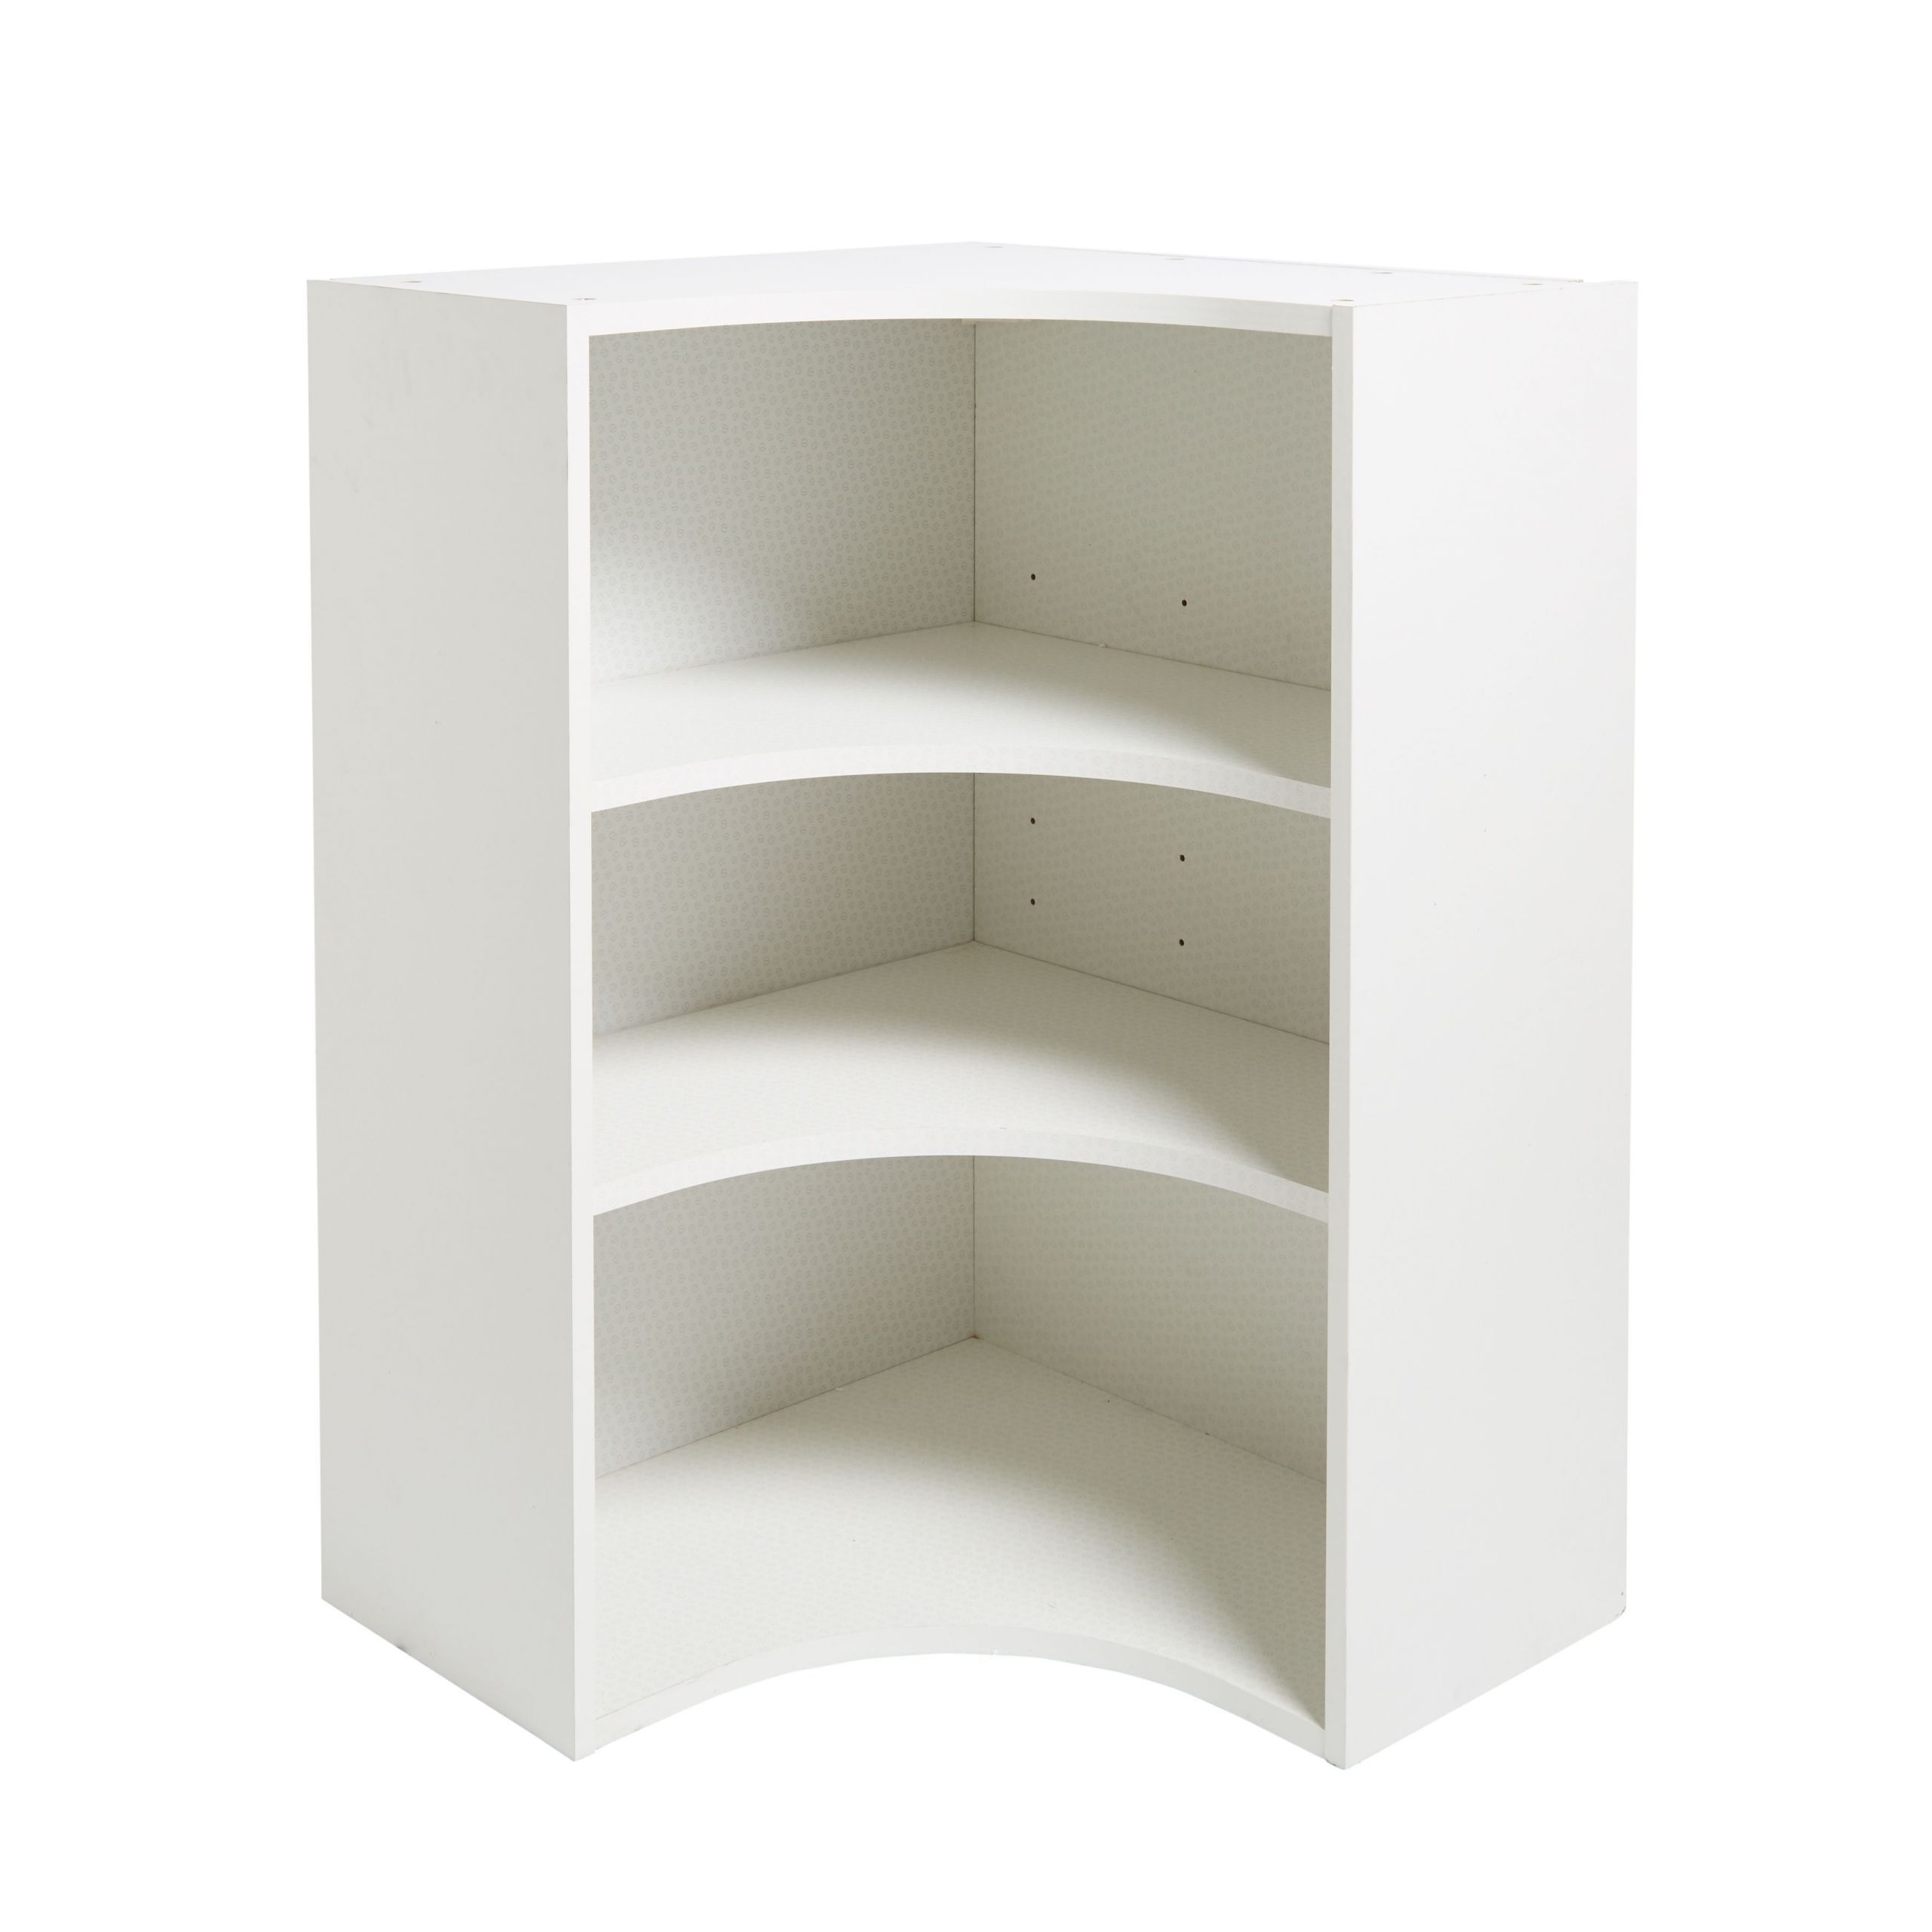 Corner Wall Kitchen Cabinet
 IT Kitchens White Curved Corner Tall Wall Cabinet W 625mm